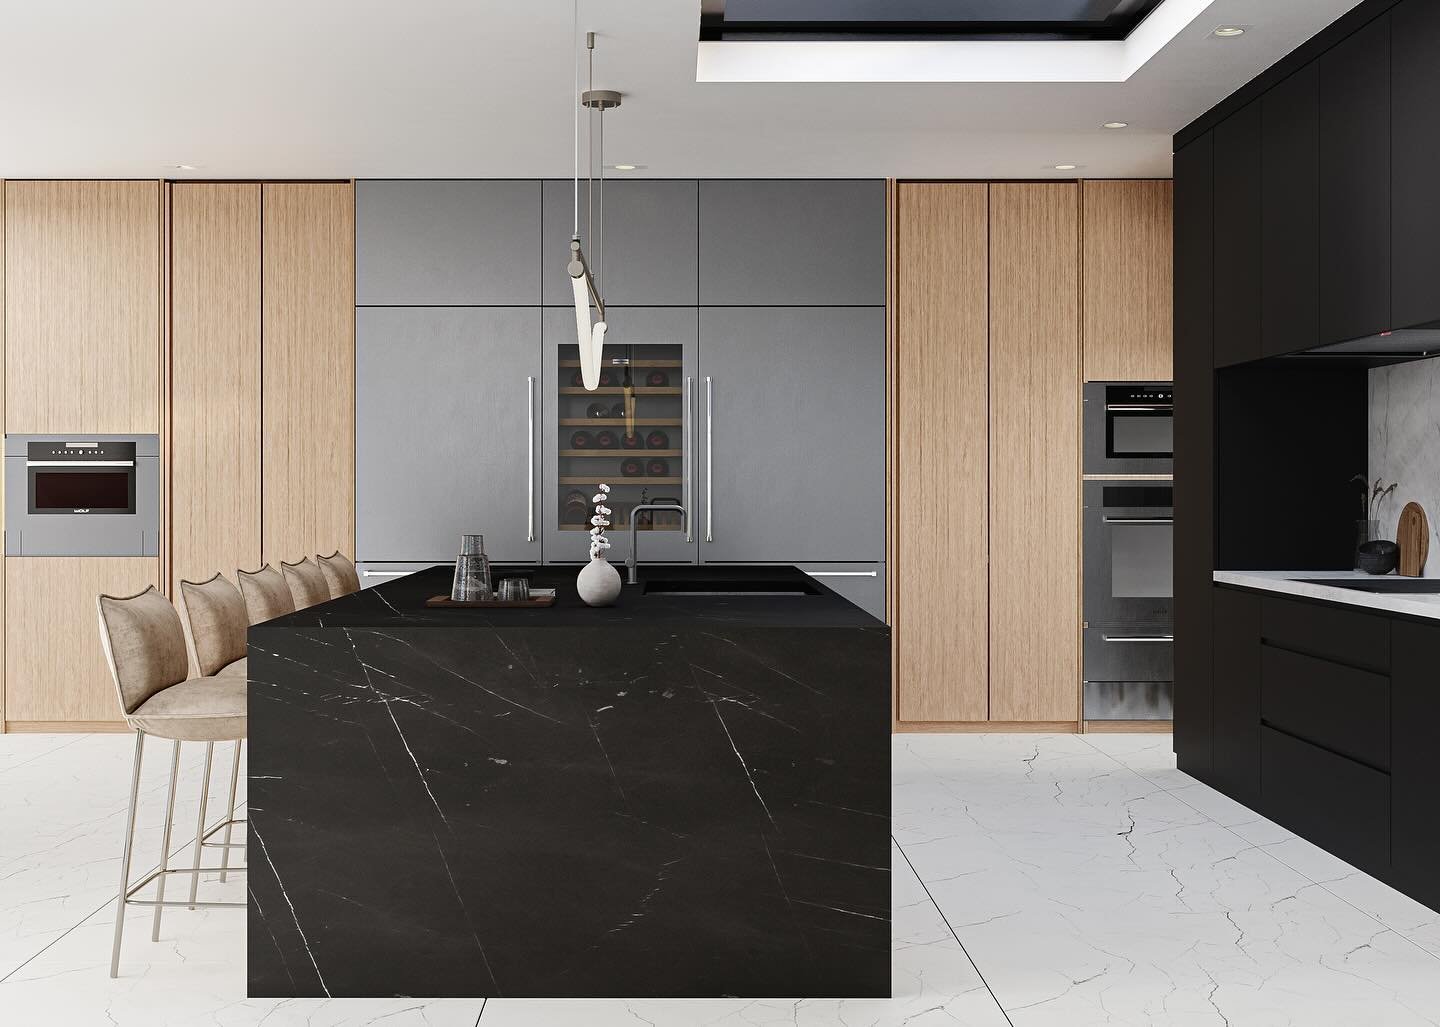 Kicking off the week with some exciting choices at our Hillside Retreat, and we want your vote! Our clients requested a clean and sophisticated kitchen to serve as the heart of their contemporary home.

Are you leaning toward the bold black and wood-